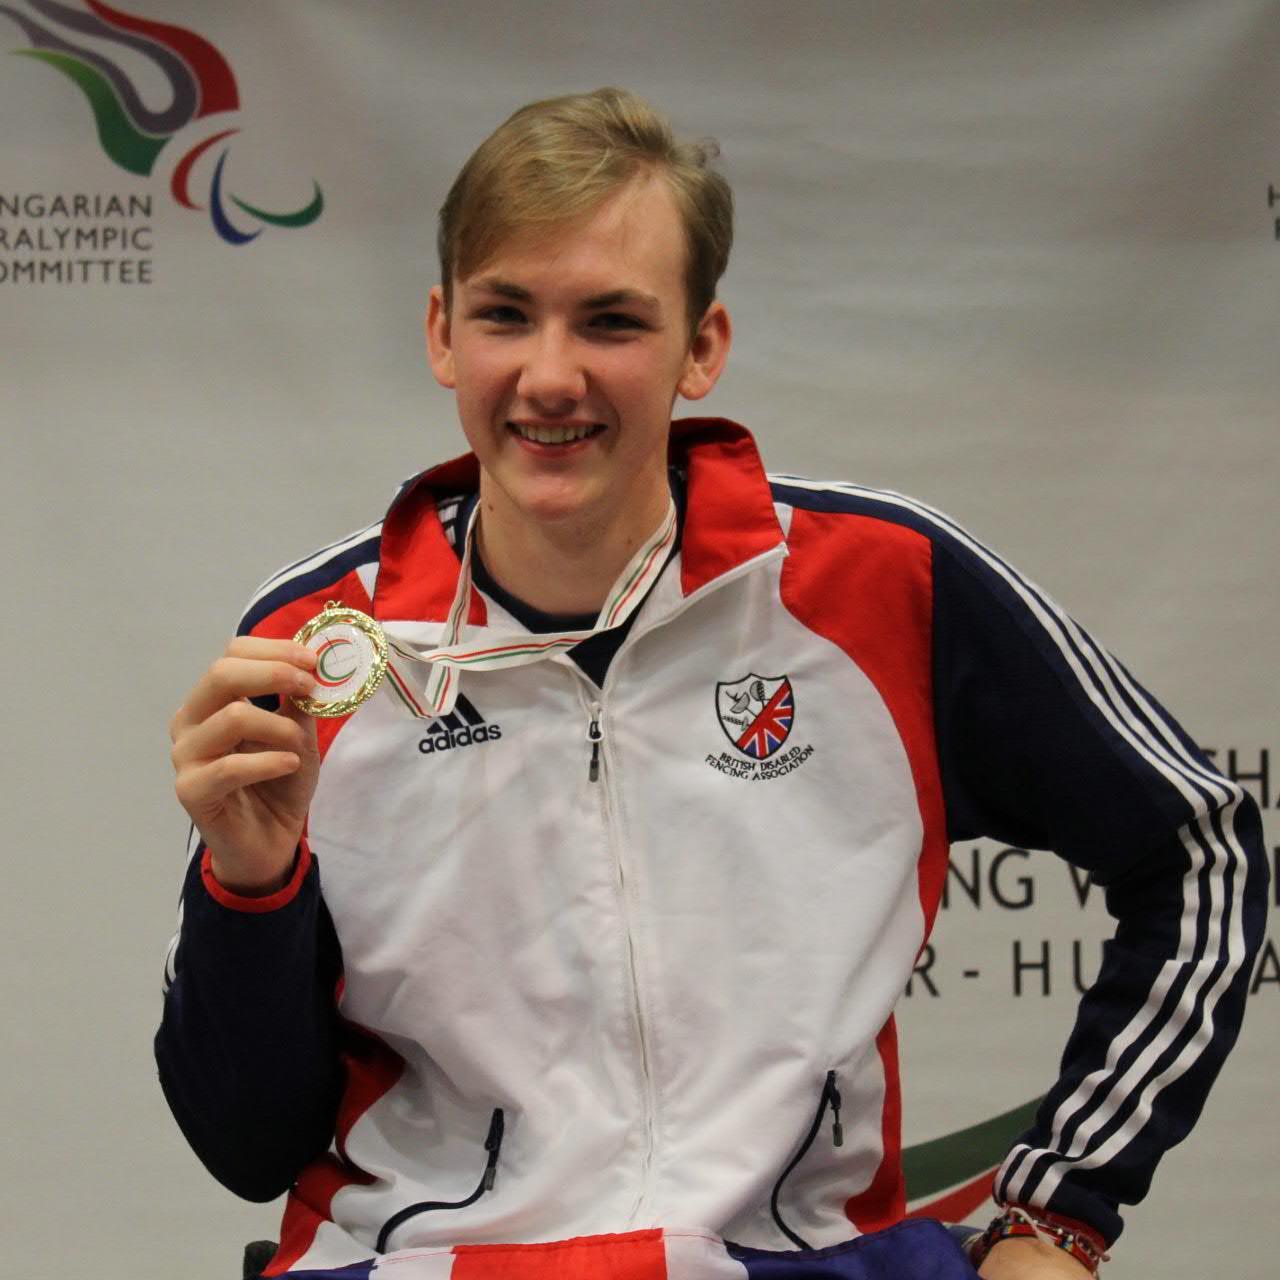 Wheelchair fencer Piers Gilliver back with a bronze in first competition since Rio 2016